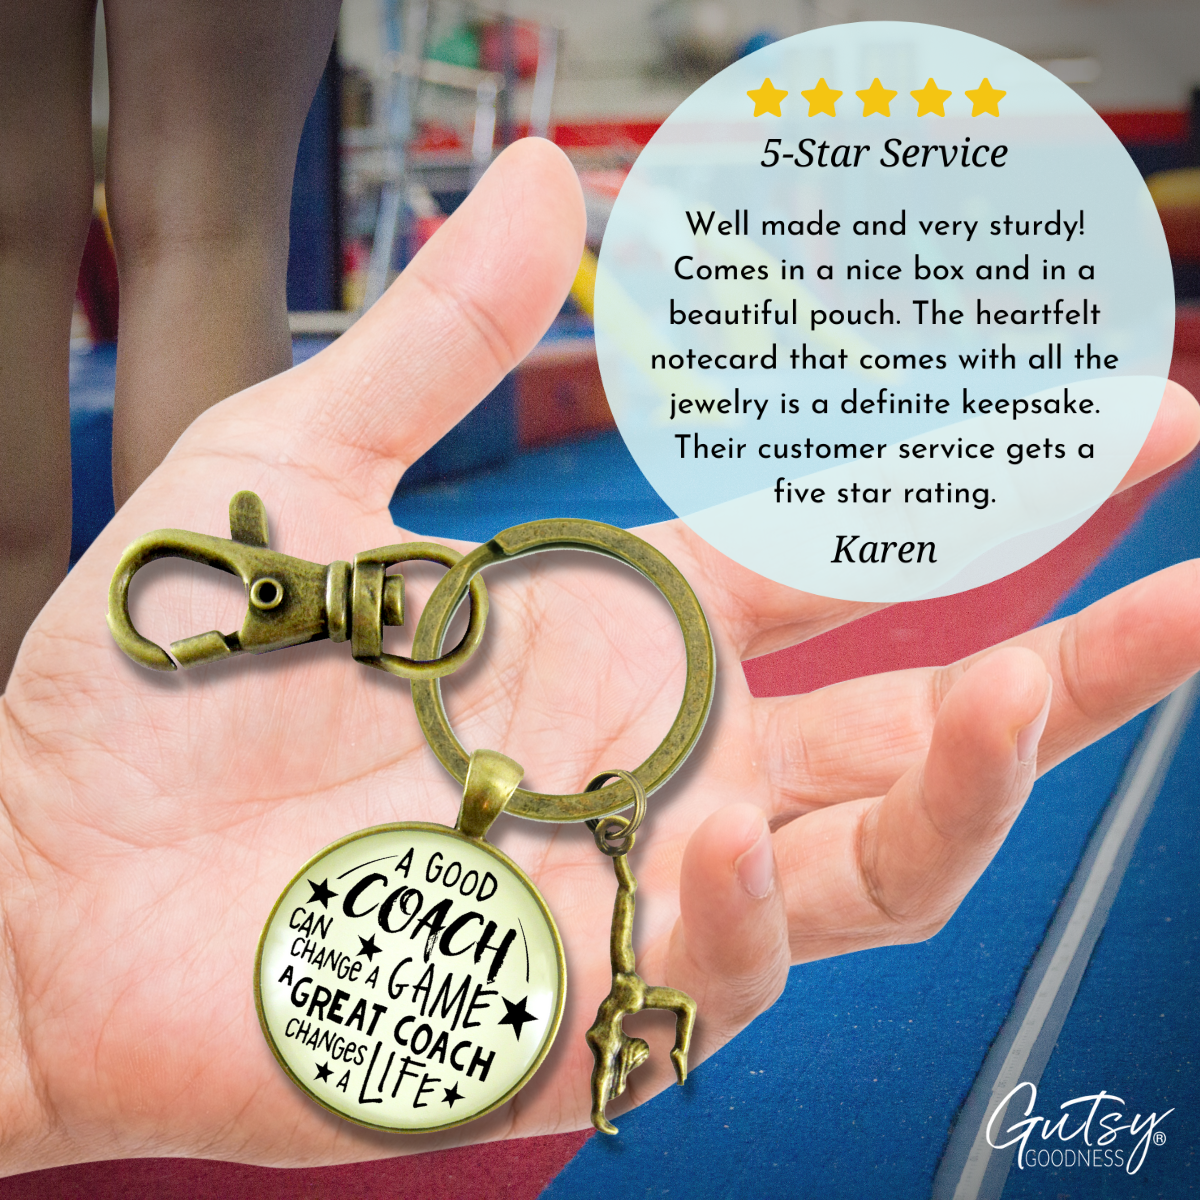 Gymnastics Coaching Sport Keychain Great Coach Changes Life Thank You Gift - Gutsy Goodness Handmade Jewelry;Gymnastics Coaching Sport Keychain Great Coach Changes Life Thank You Gift - Gutsy Goodness Handmade Jewelry Gifts